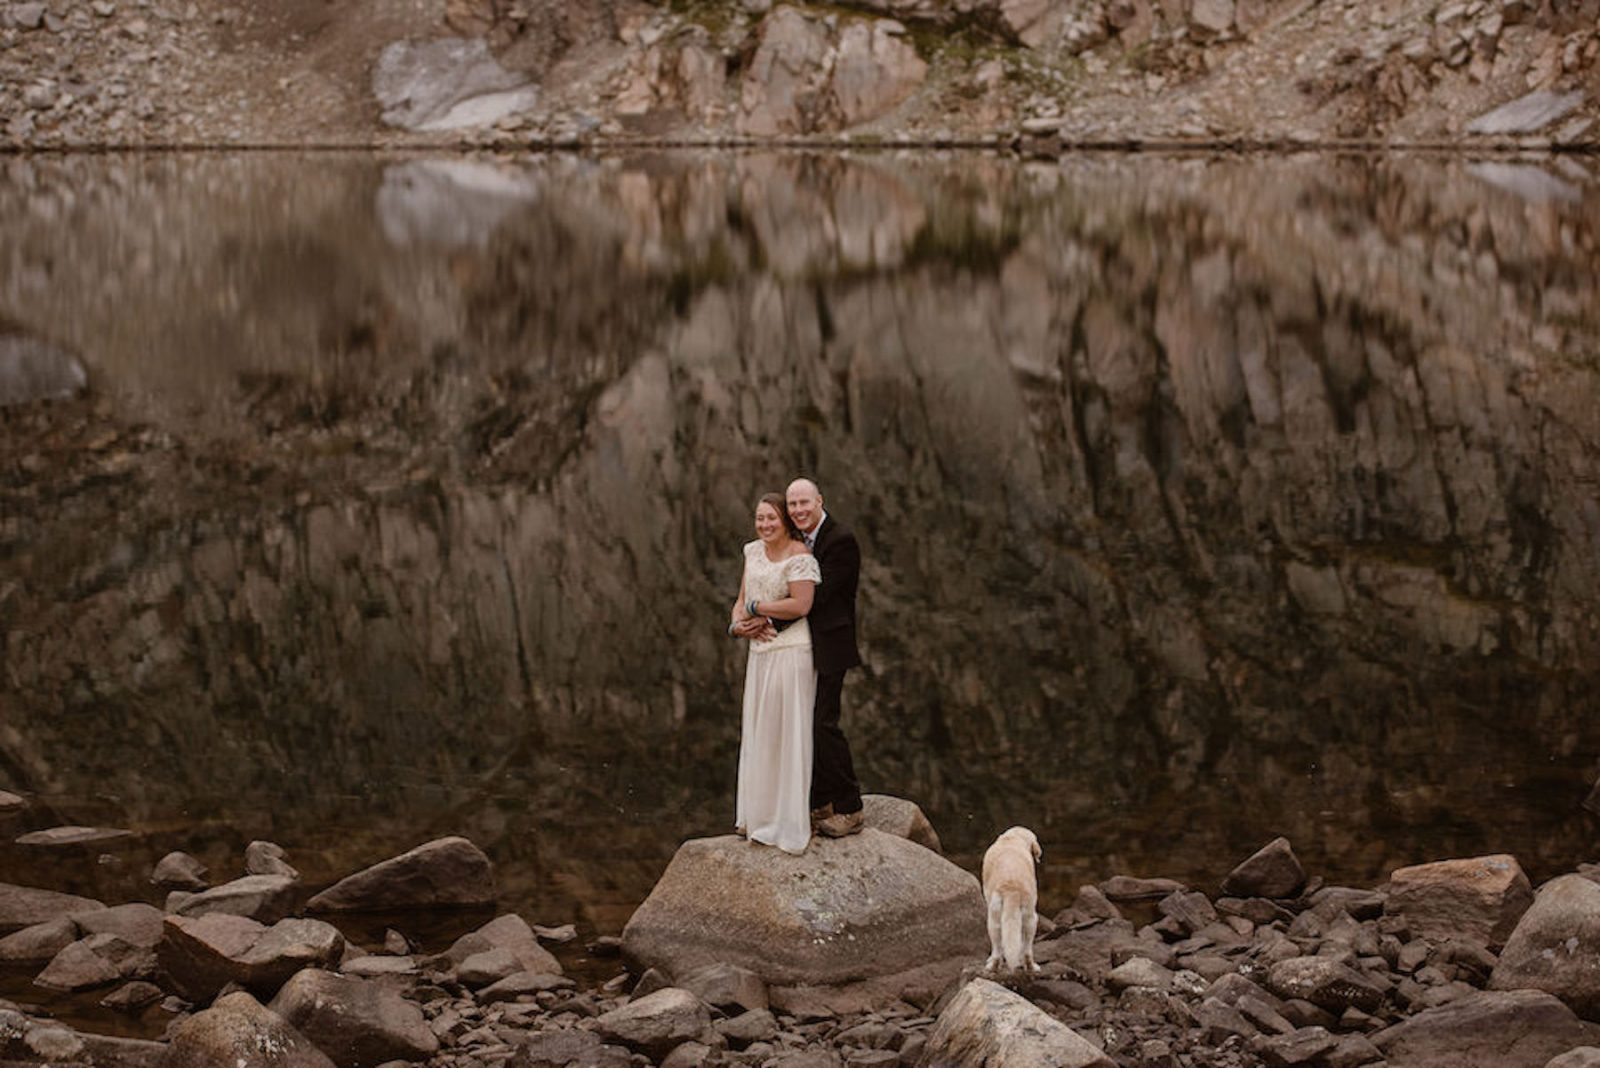 private elopement in the mountains wedding dress